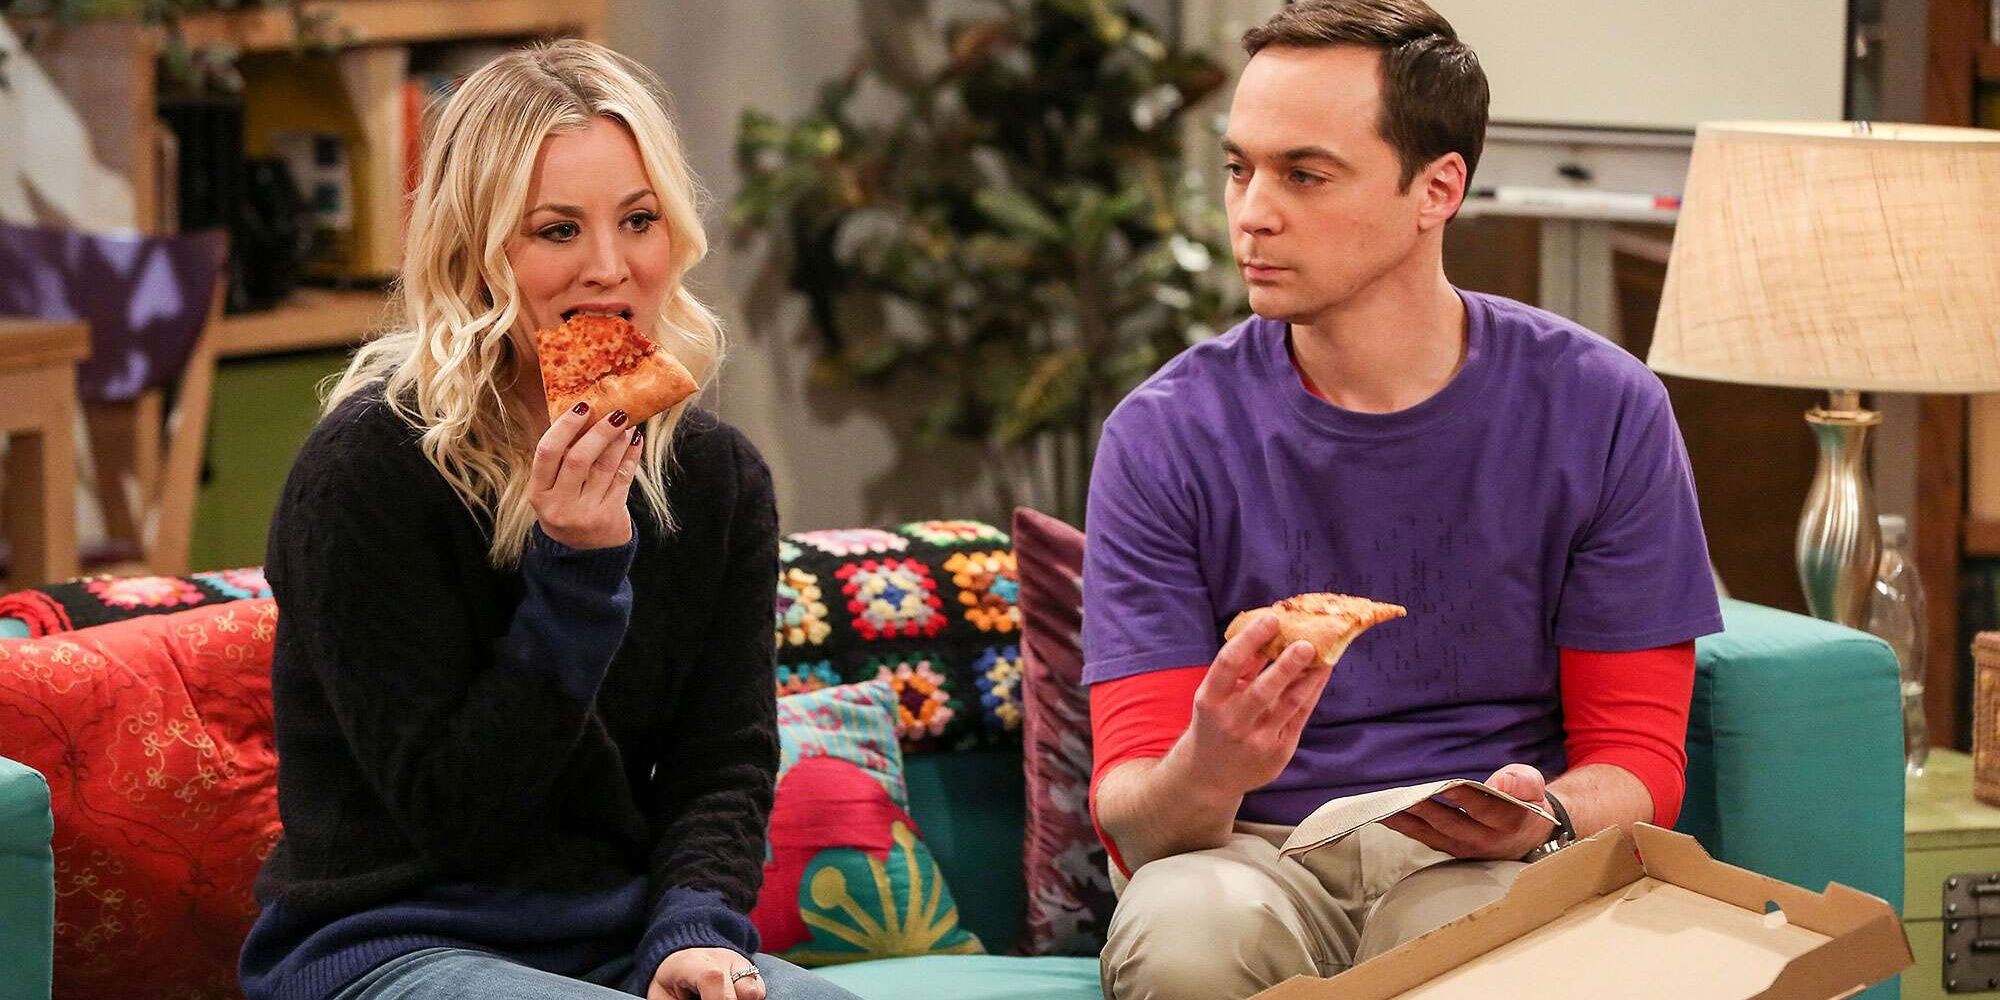 Penny and Sheldon eating a pizza in his apartment in The Big Bang Theory